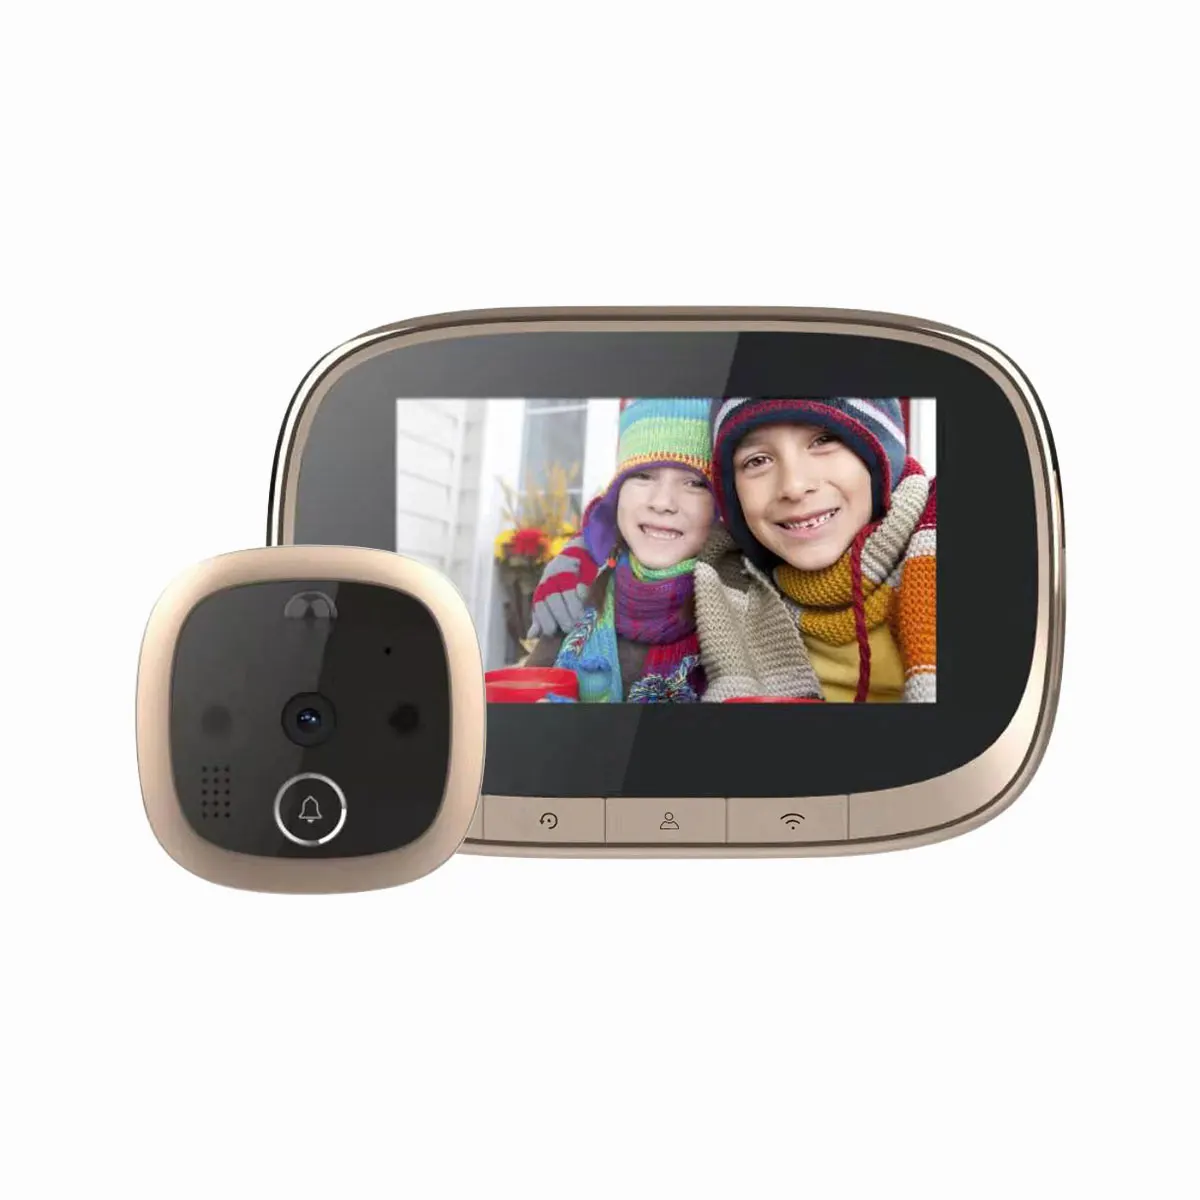 

Escam C80 4.3" LCD Smart WiFi Video Doorbell Peephole Doorbell Viewer Home PIR Motion Detection Security Monitor Two-Way Voice